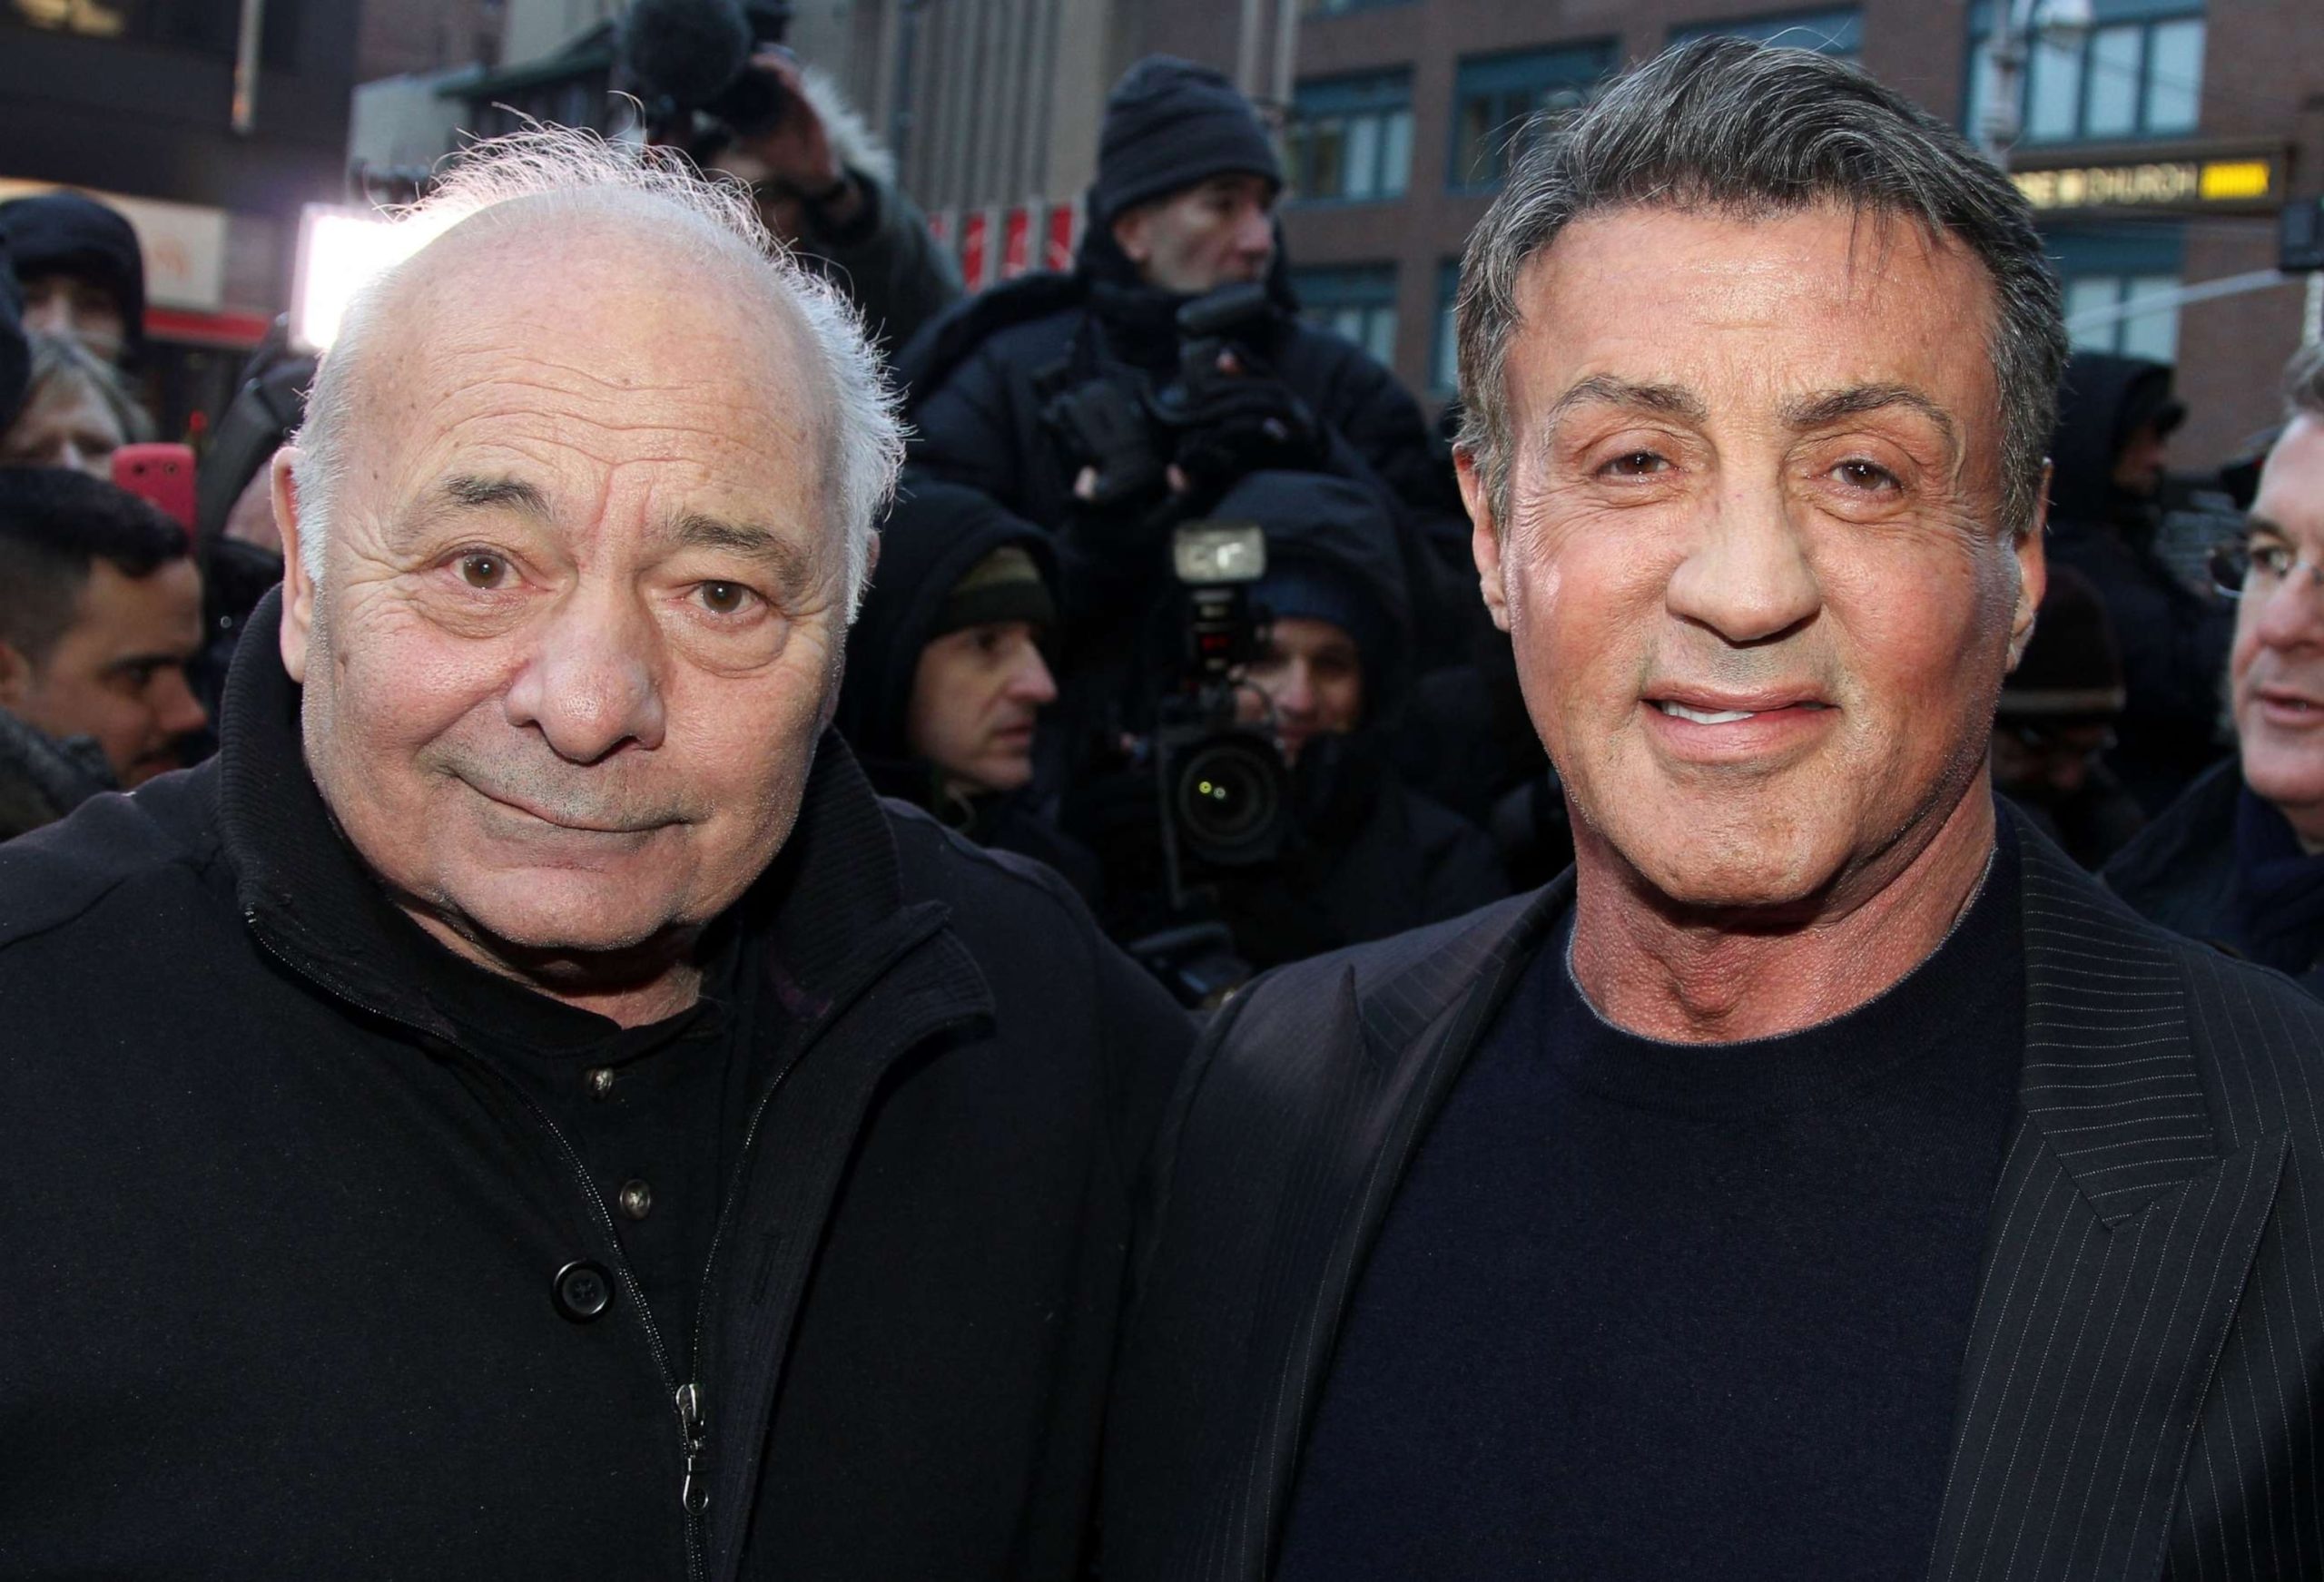 Actor Burt Young, famous for his role in 'Rocky', passes away at the age of 83, after receiving an Oscar nomination